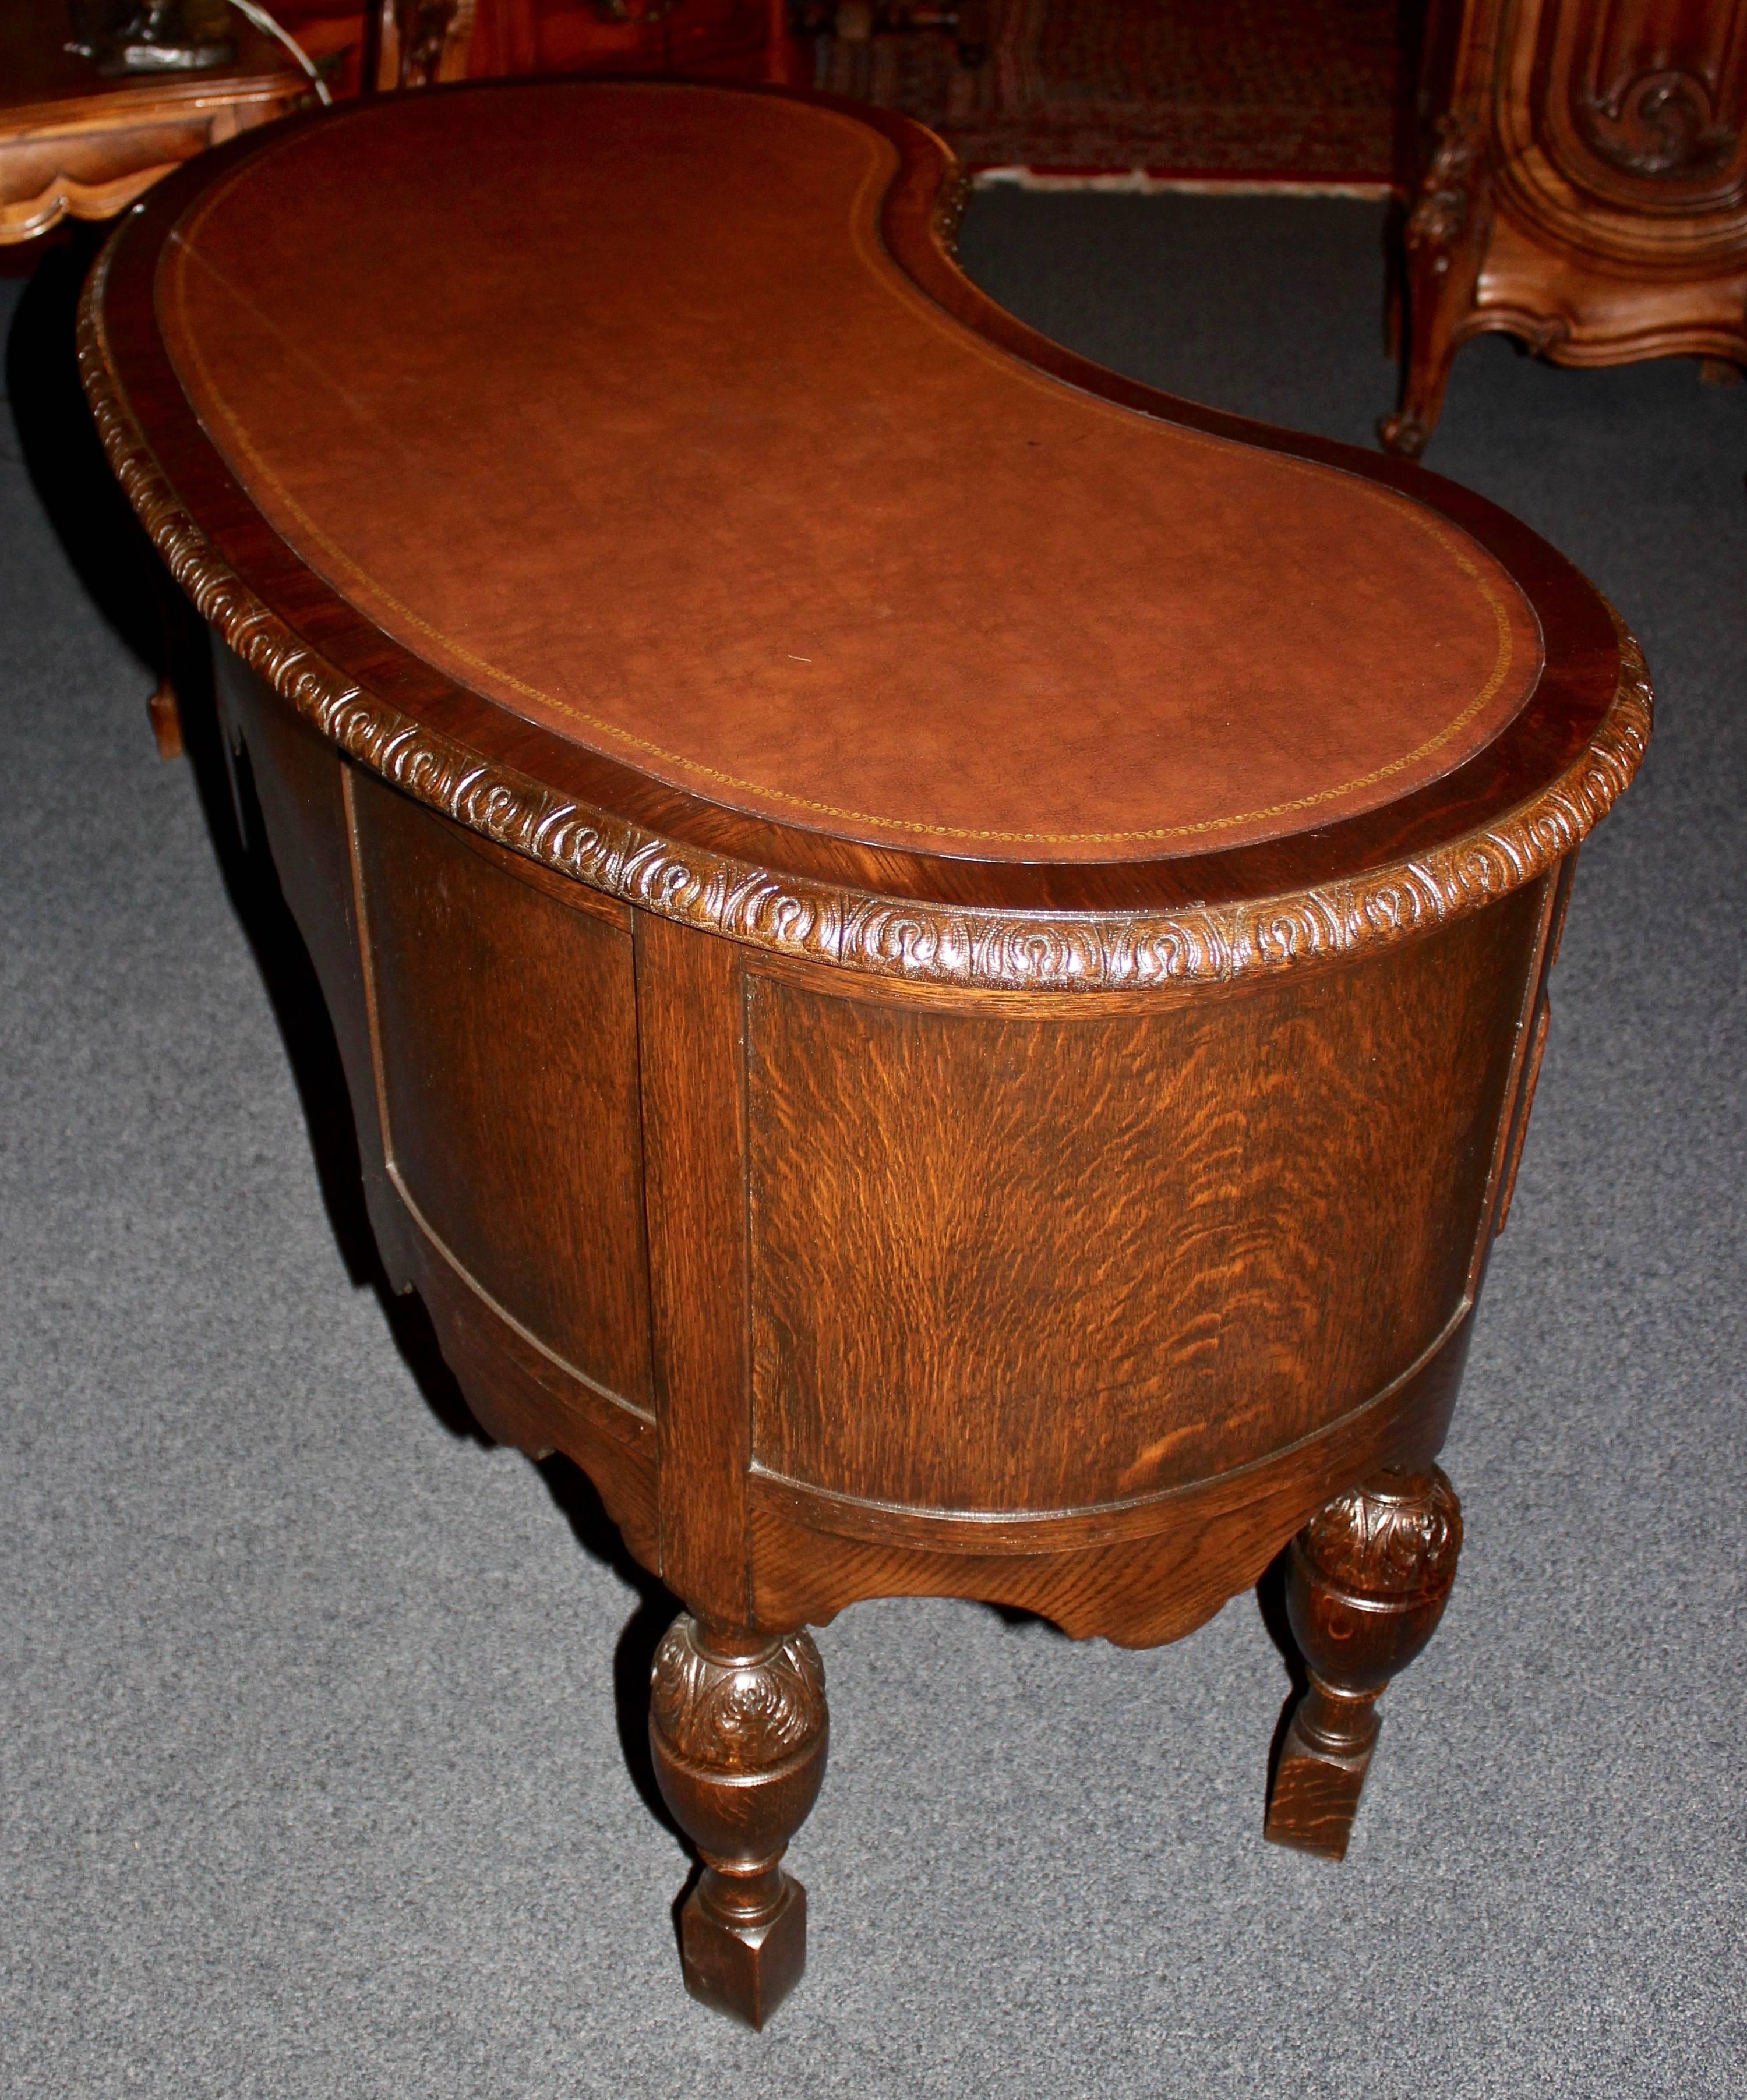 Early 20th Century English Jacobean Kidney Desk For Sale 2